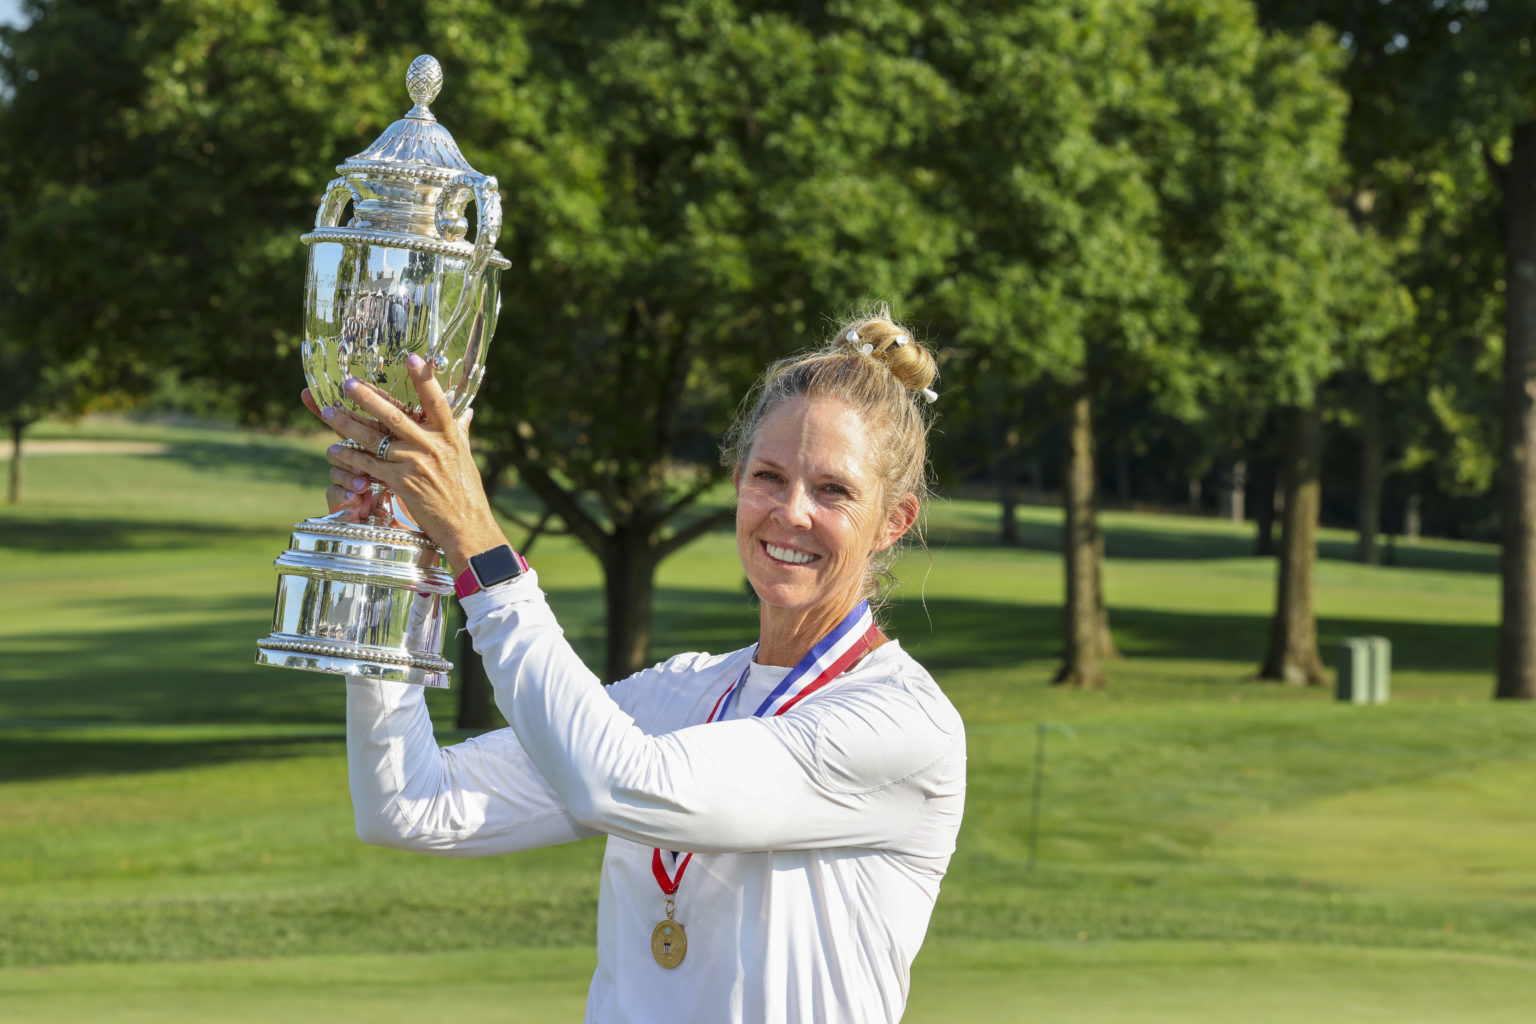 2022 US Senior Women's Open final results Prize money payout